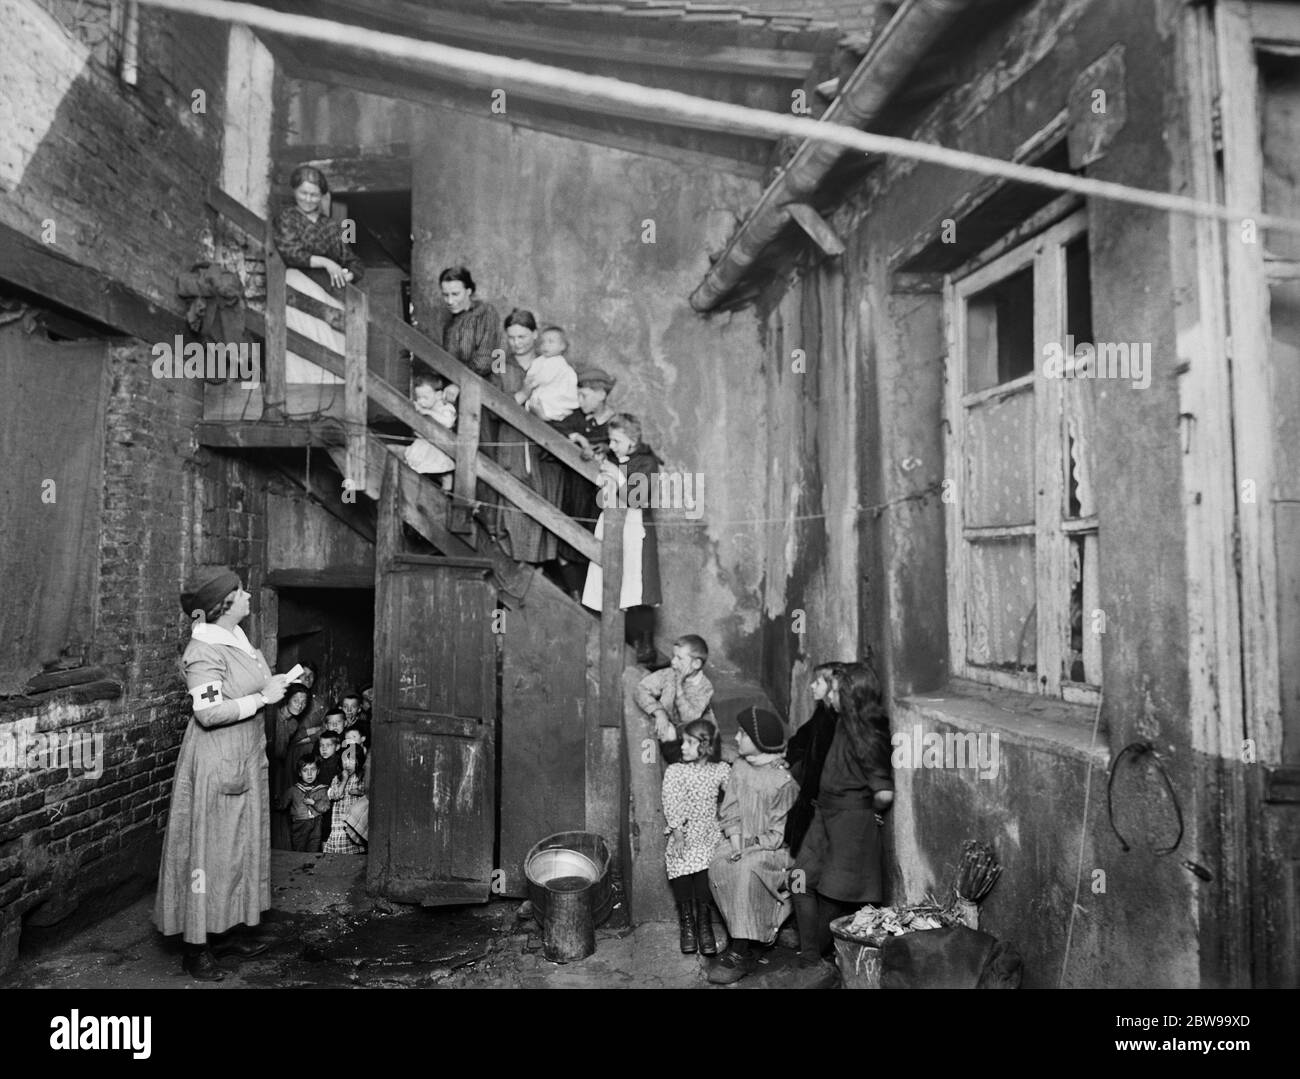 American Red Cross Nurse visiting Refugees in Housing Condemned before the War, but now being used to handle flood of Refugees coming to town, St. Etienne, France, Lewis Wickes Hine, American National Red Cross Photograph Collection, July 1918 Stock Photo